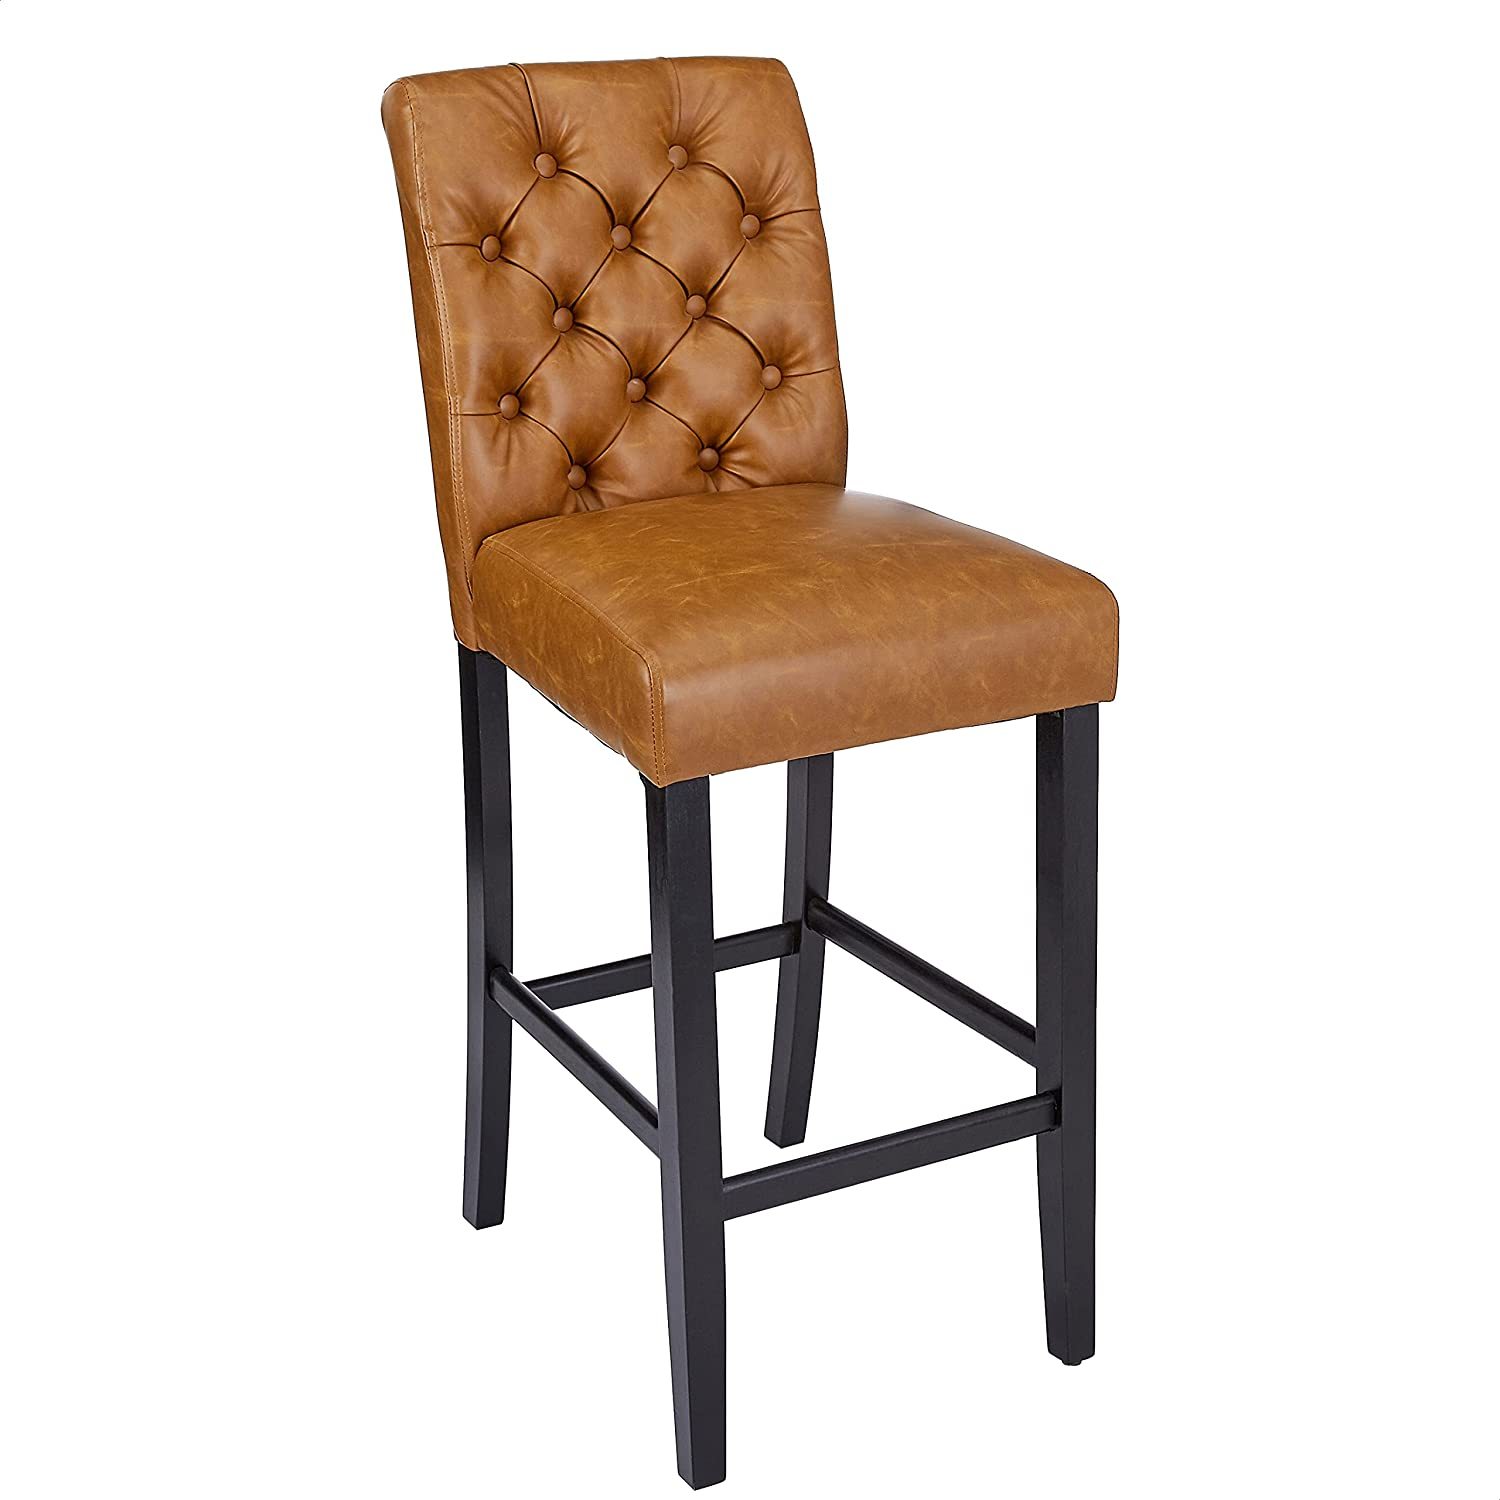 Dining Chairs Mid-Century Tufted Leather Kitchen Counter Uped Bar Stoo